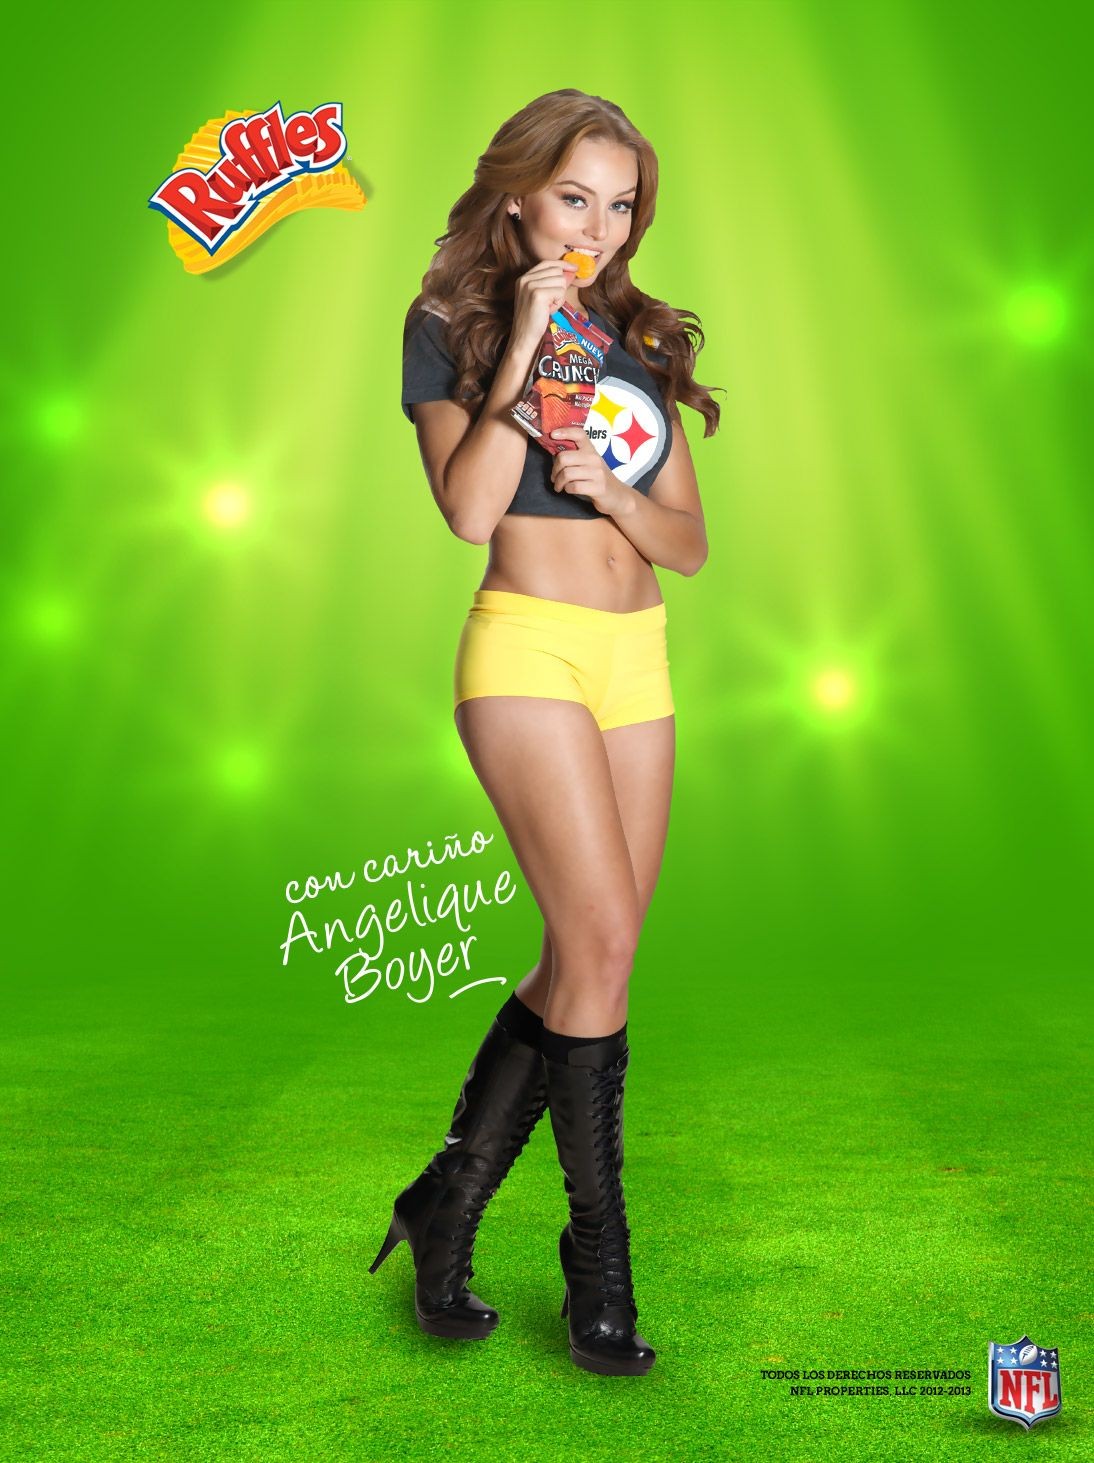 Angelique Boyer trägt sexy Trikot Look-alike Outfits in nfl Promos
 #75243053